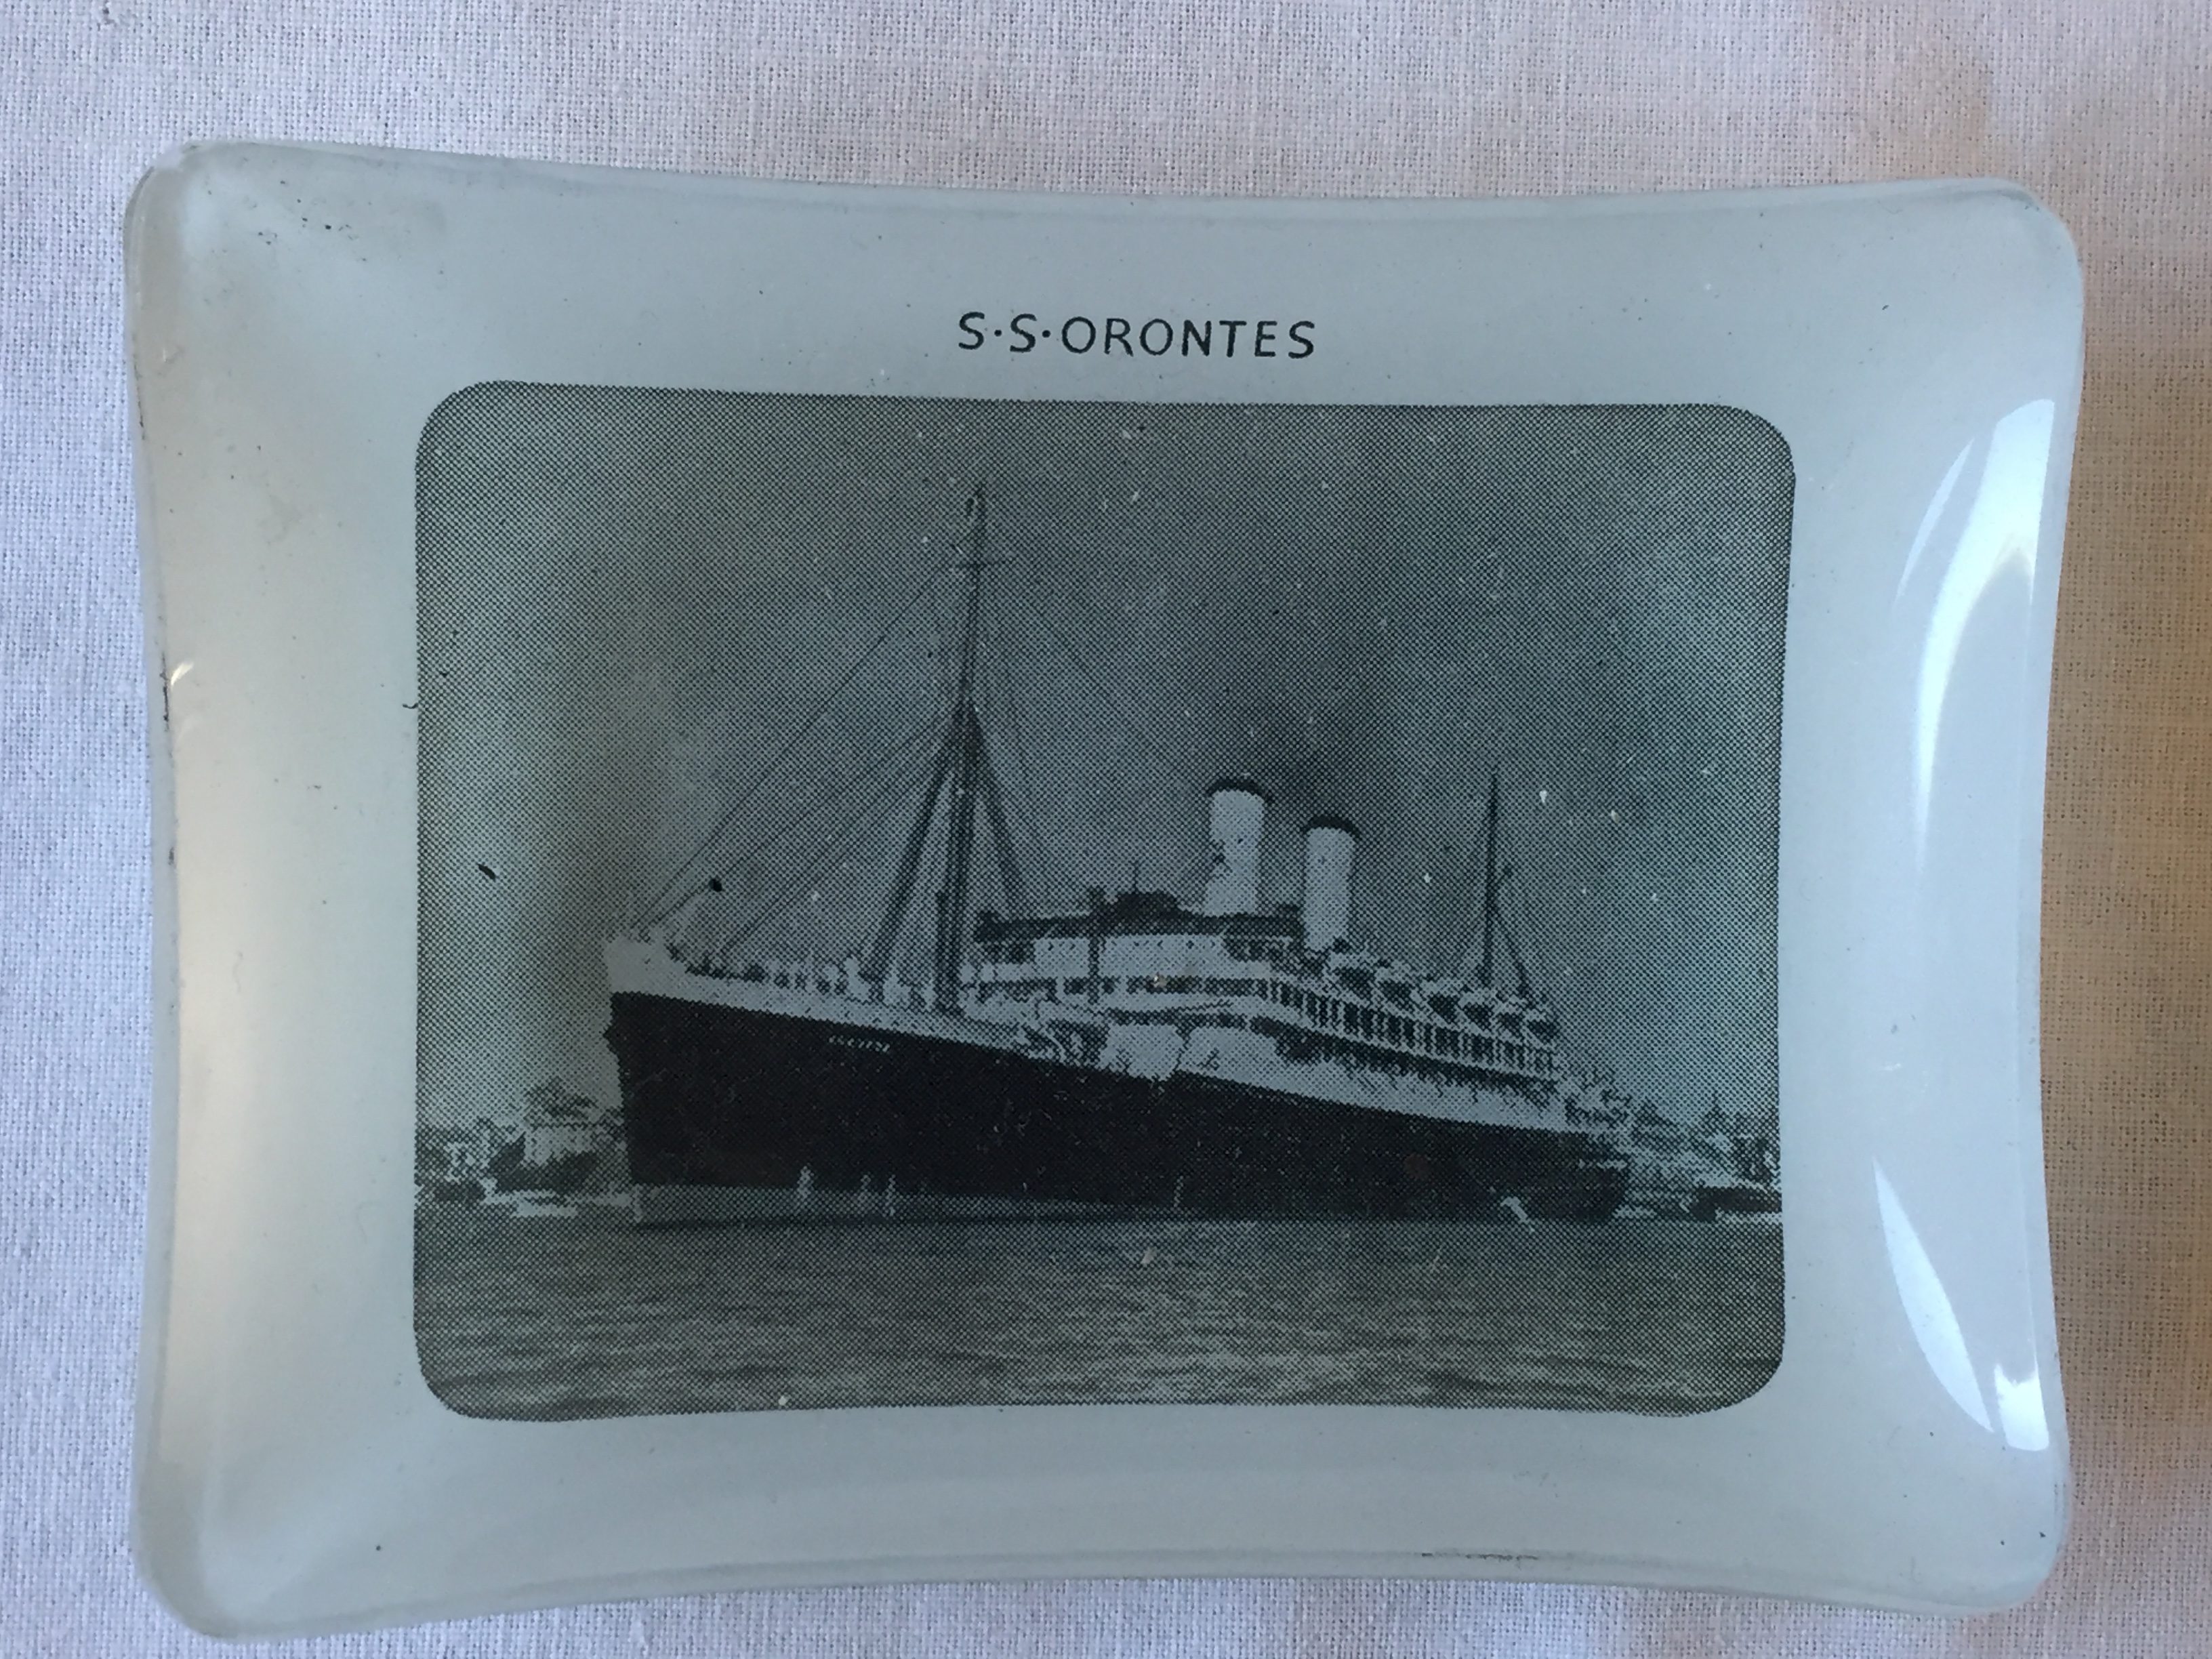 SOUVENIR GLASS DISH FROM THE VERY OLD VESSEL THE SS ORONTES